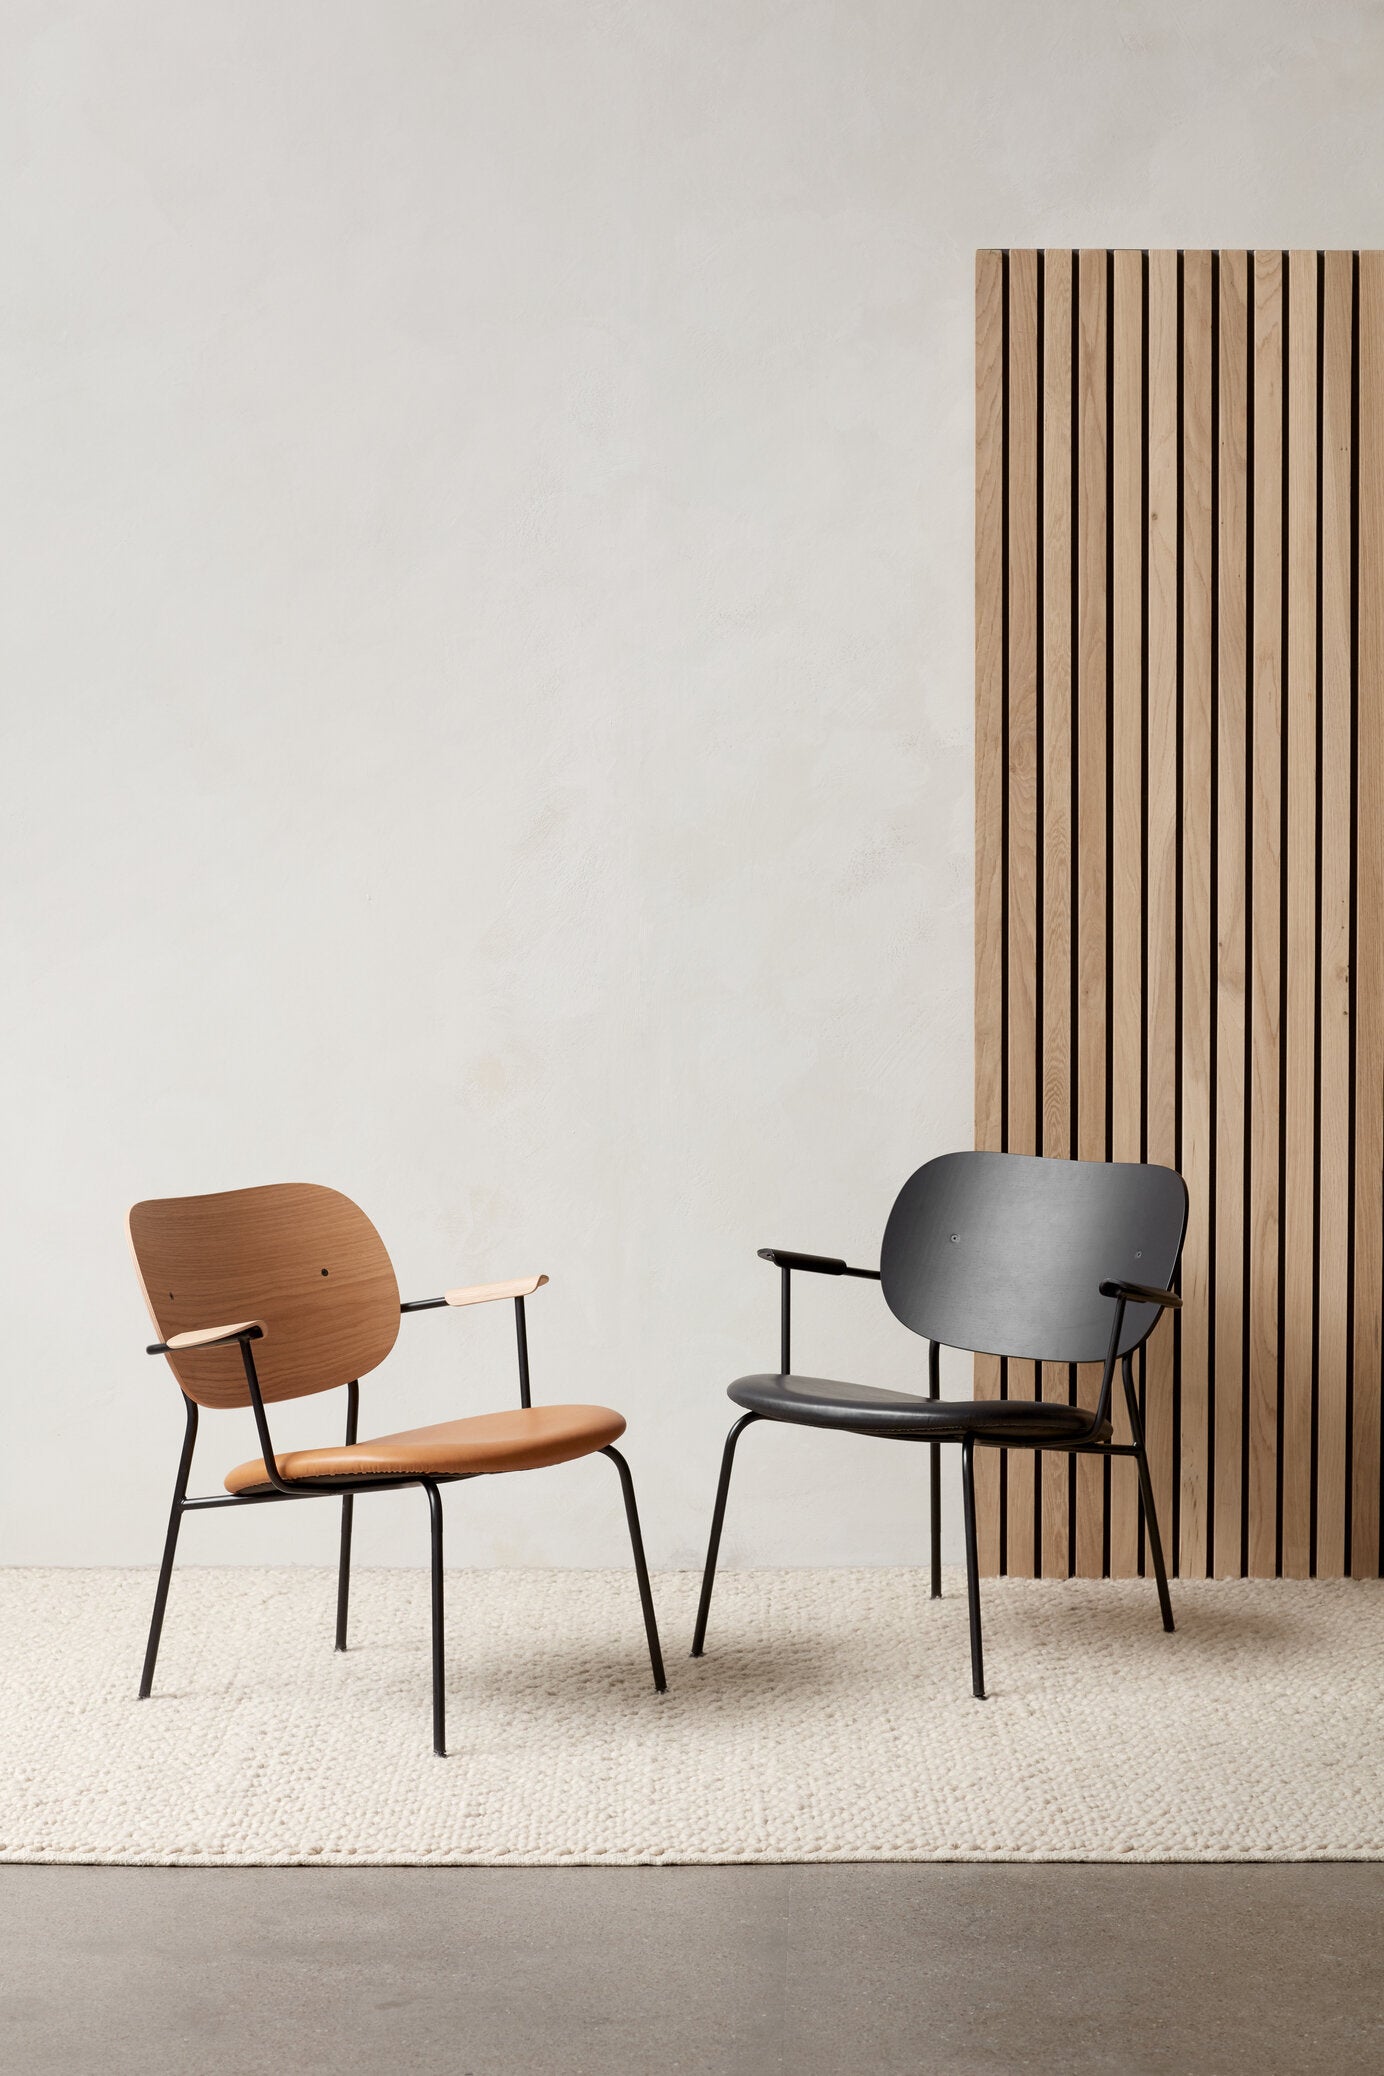 Co Lounge Chair - Upholstered Seat by Menu / Audo Copenhagen